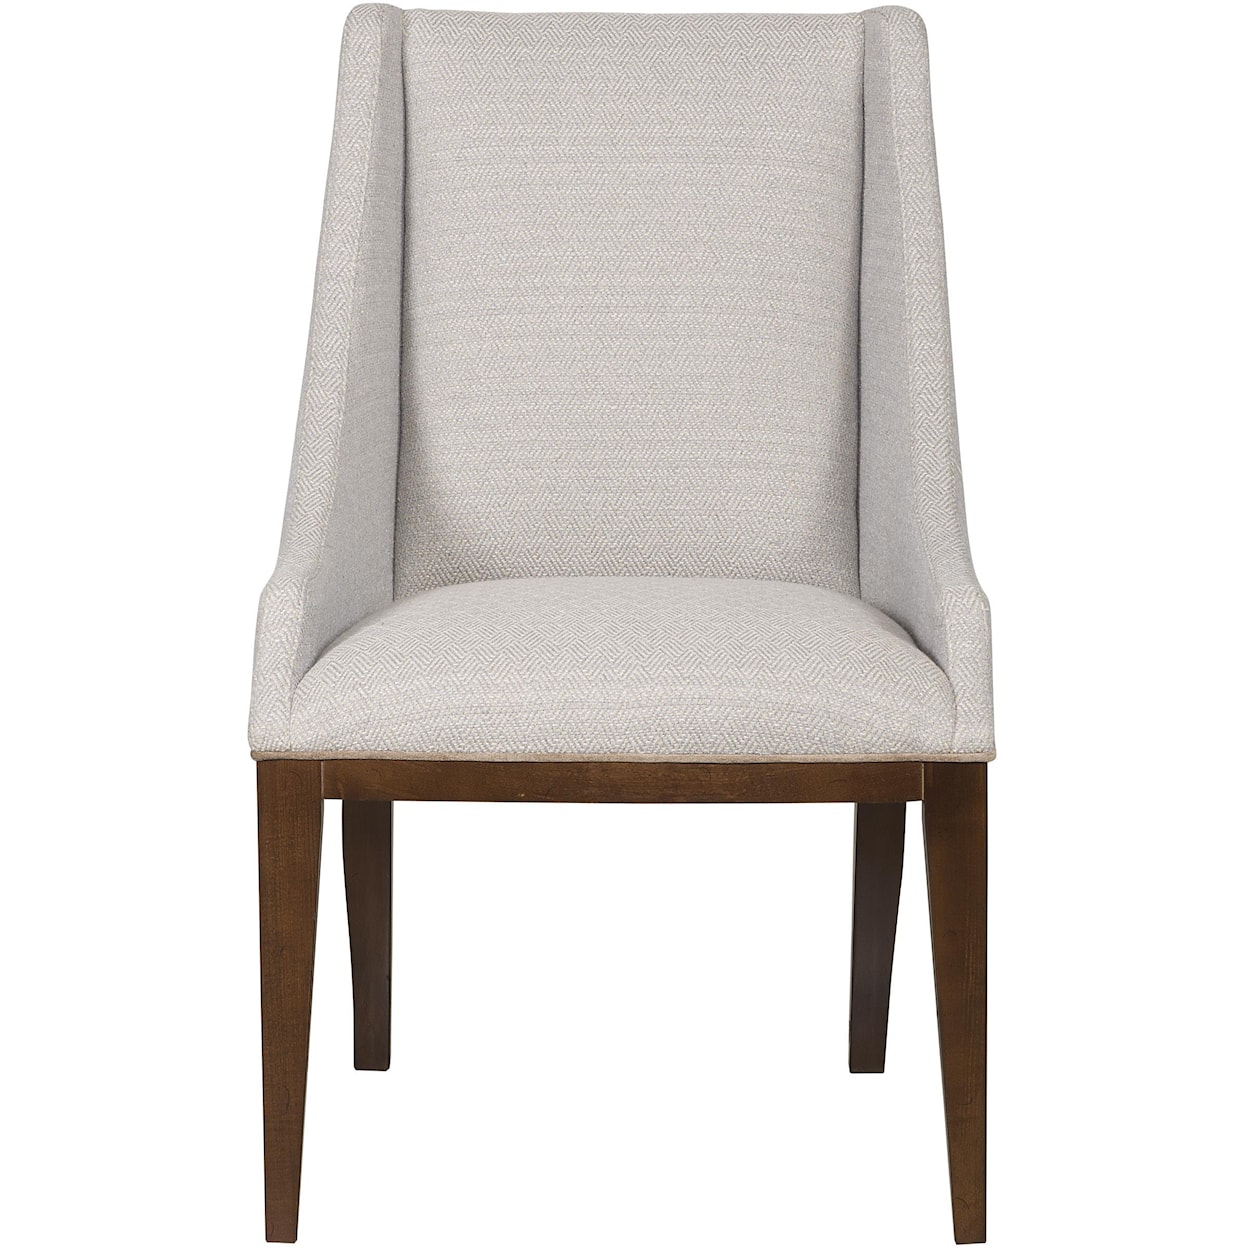 Vanguard Furniture Thom Filicia Home Collection Ithaca Dining Arm Chair